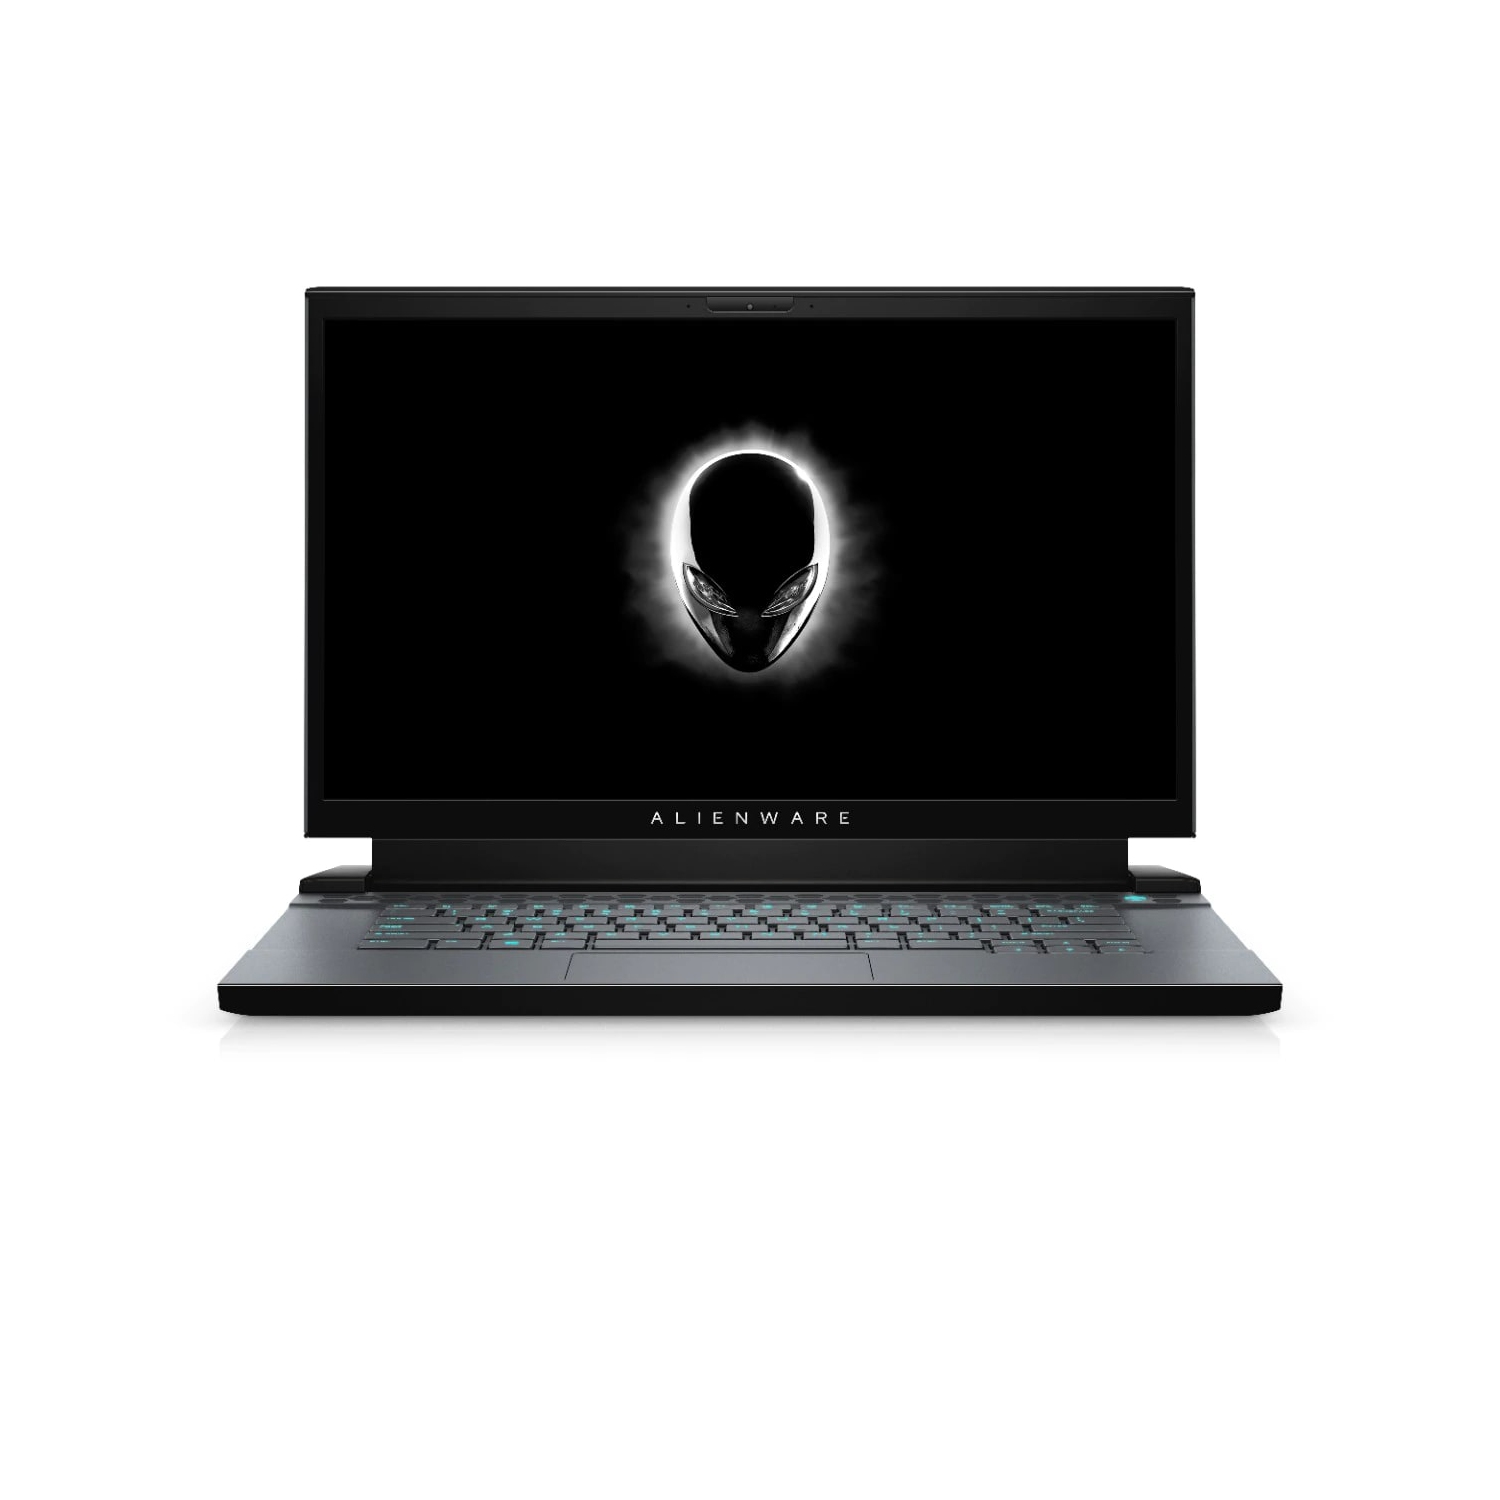 Refurbished (Excellent) - Dell Alienware m15 R2 Gaming Laptop (2019), 15.6" FHD, Core i7, 512GB SSD + 512GB SSD, 16GB RAM, RTX 2080, 6 Cores @ 4.5 GHz Certified